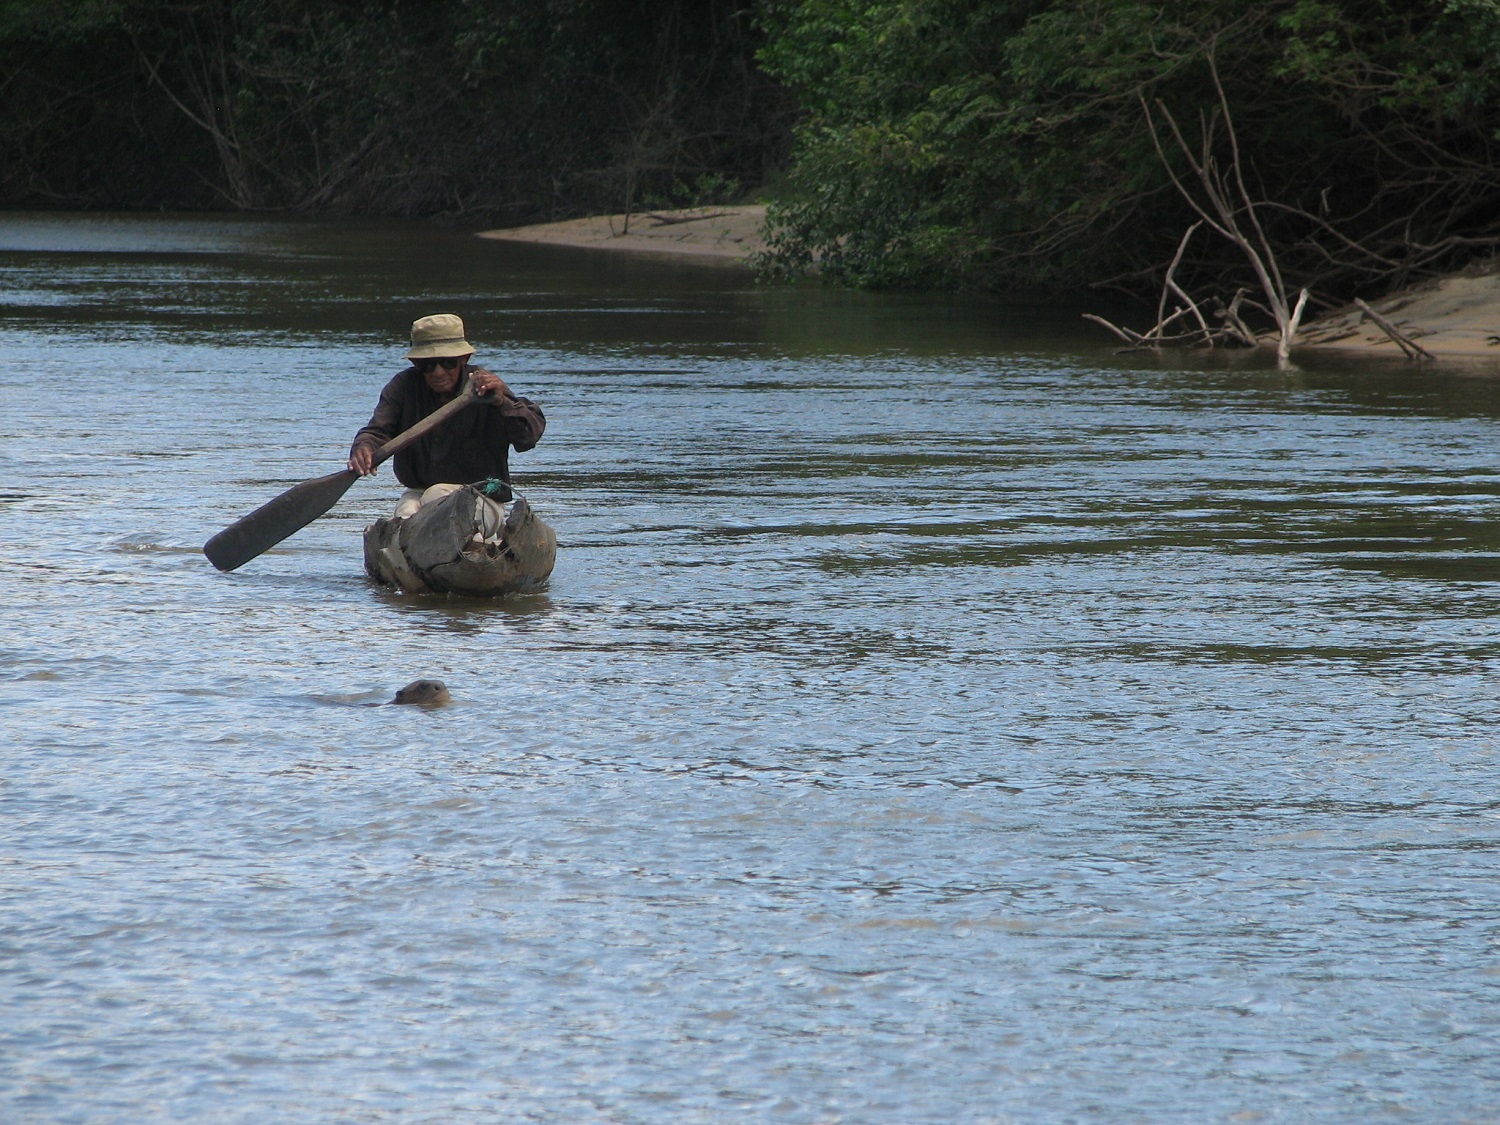 A fisherman on a river - when visiting Guyana you'll be taken back in time